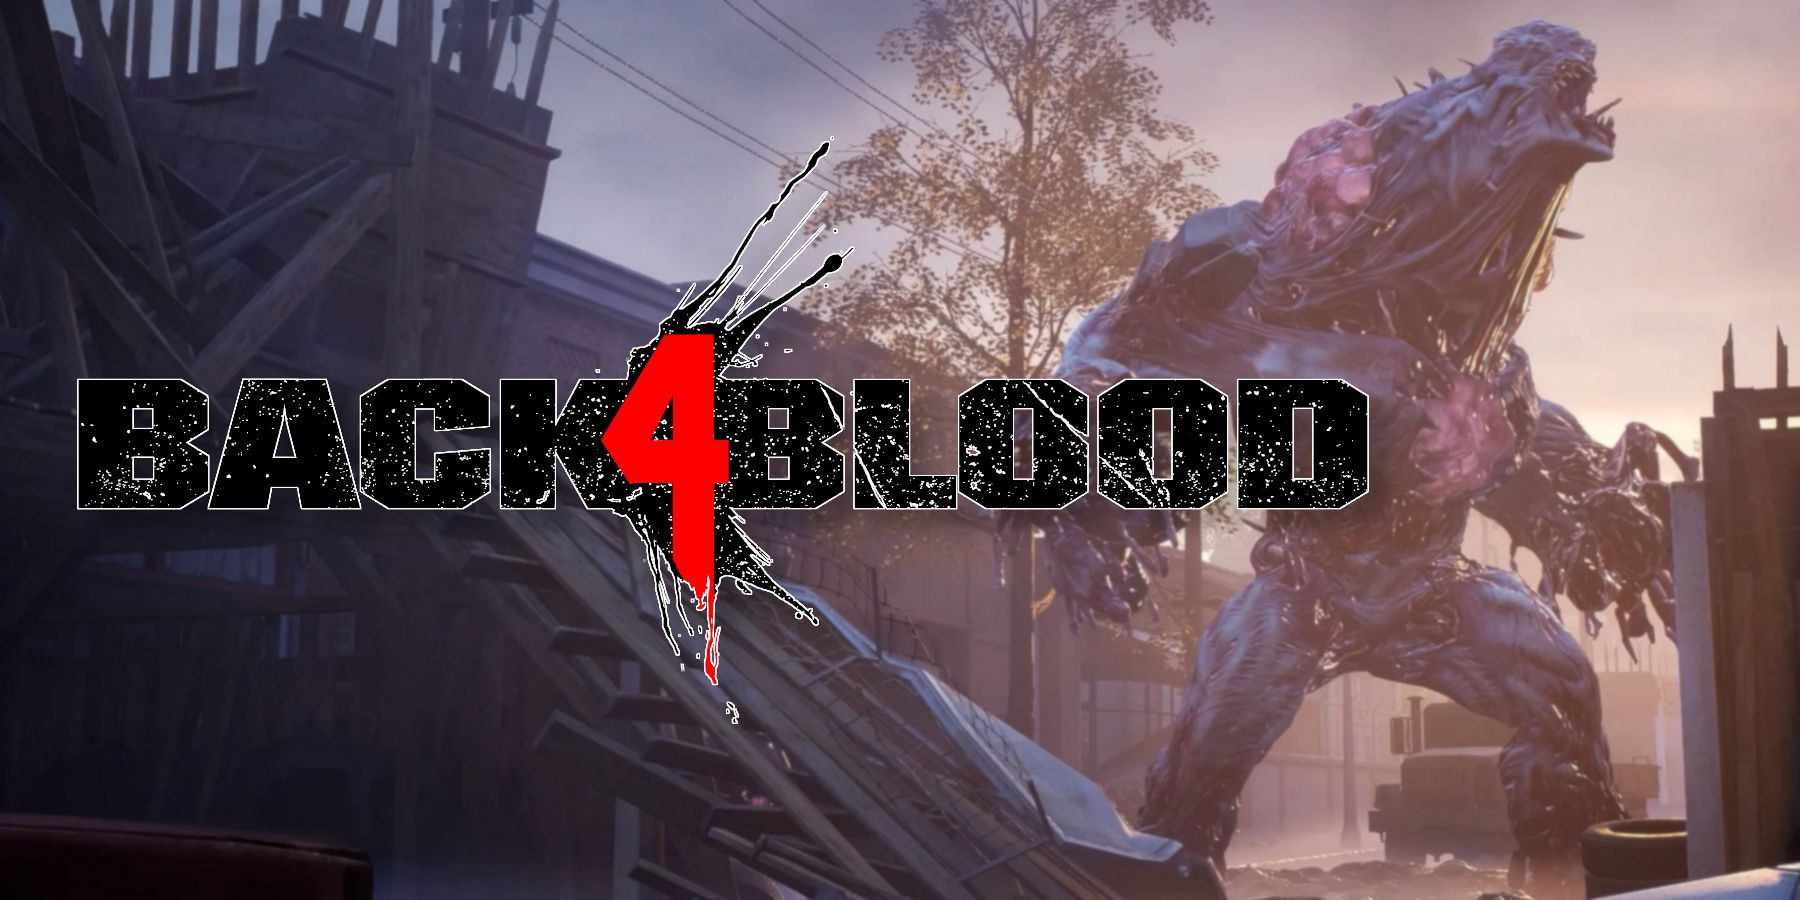 An image of an ogre in the background with the Back 4 Blood logo in the foreground.